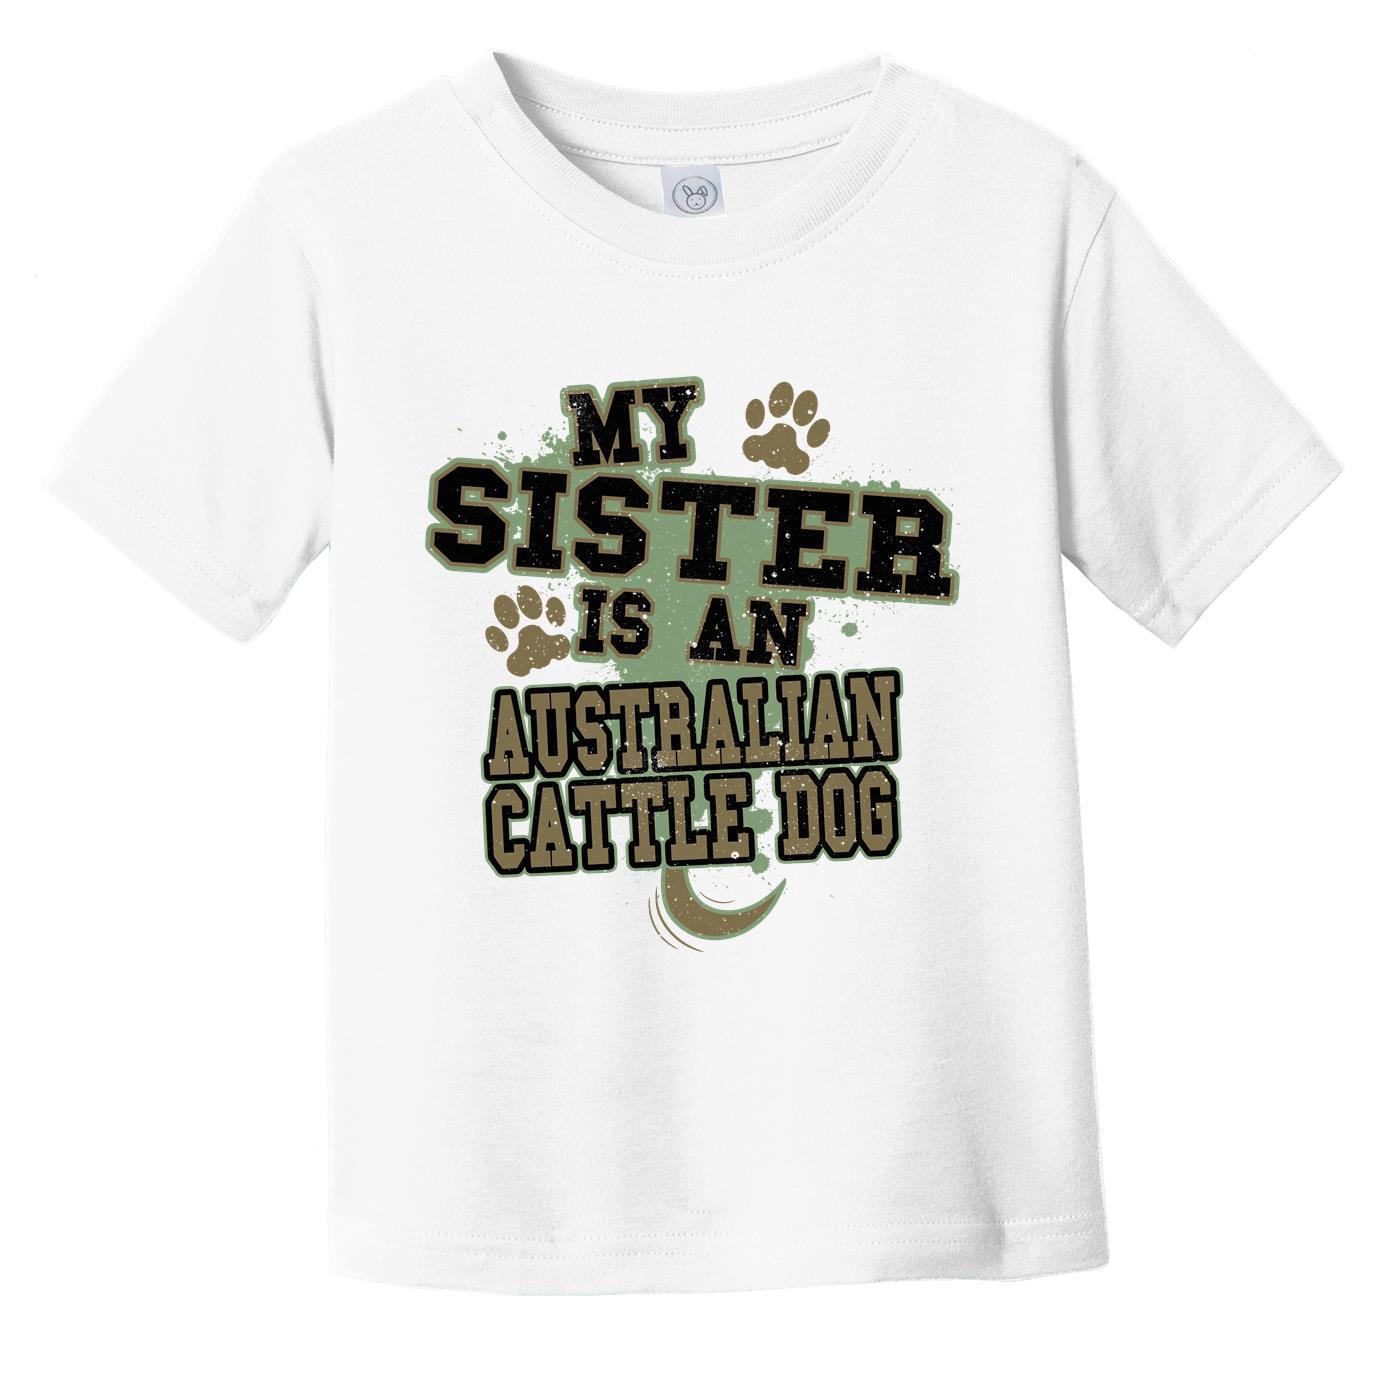 My Sister Is An Australian Cattle Dog Funny Dog Infant Toddler T-Shirt